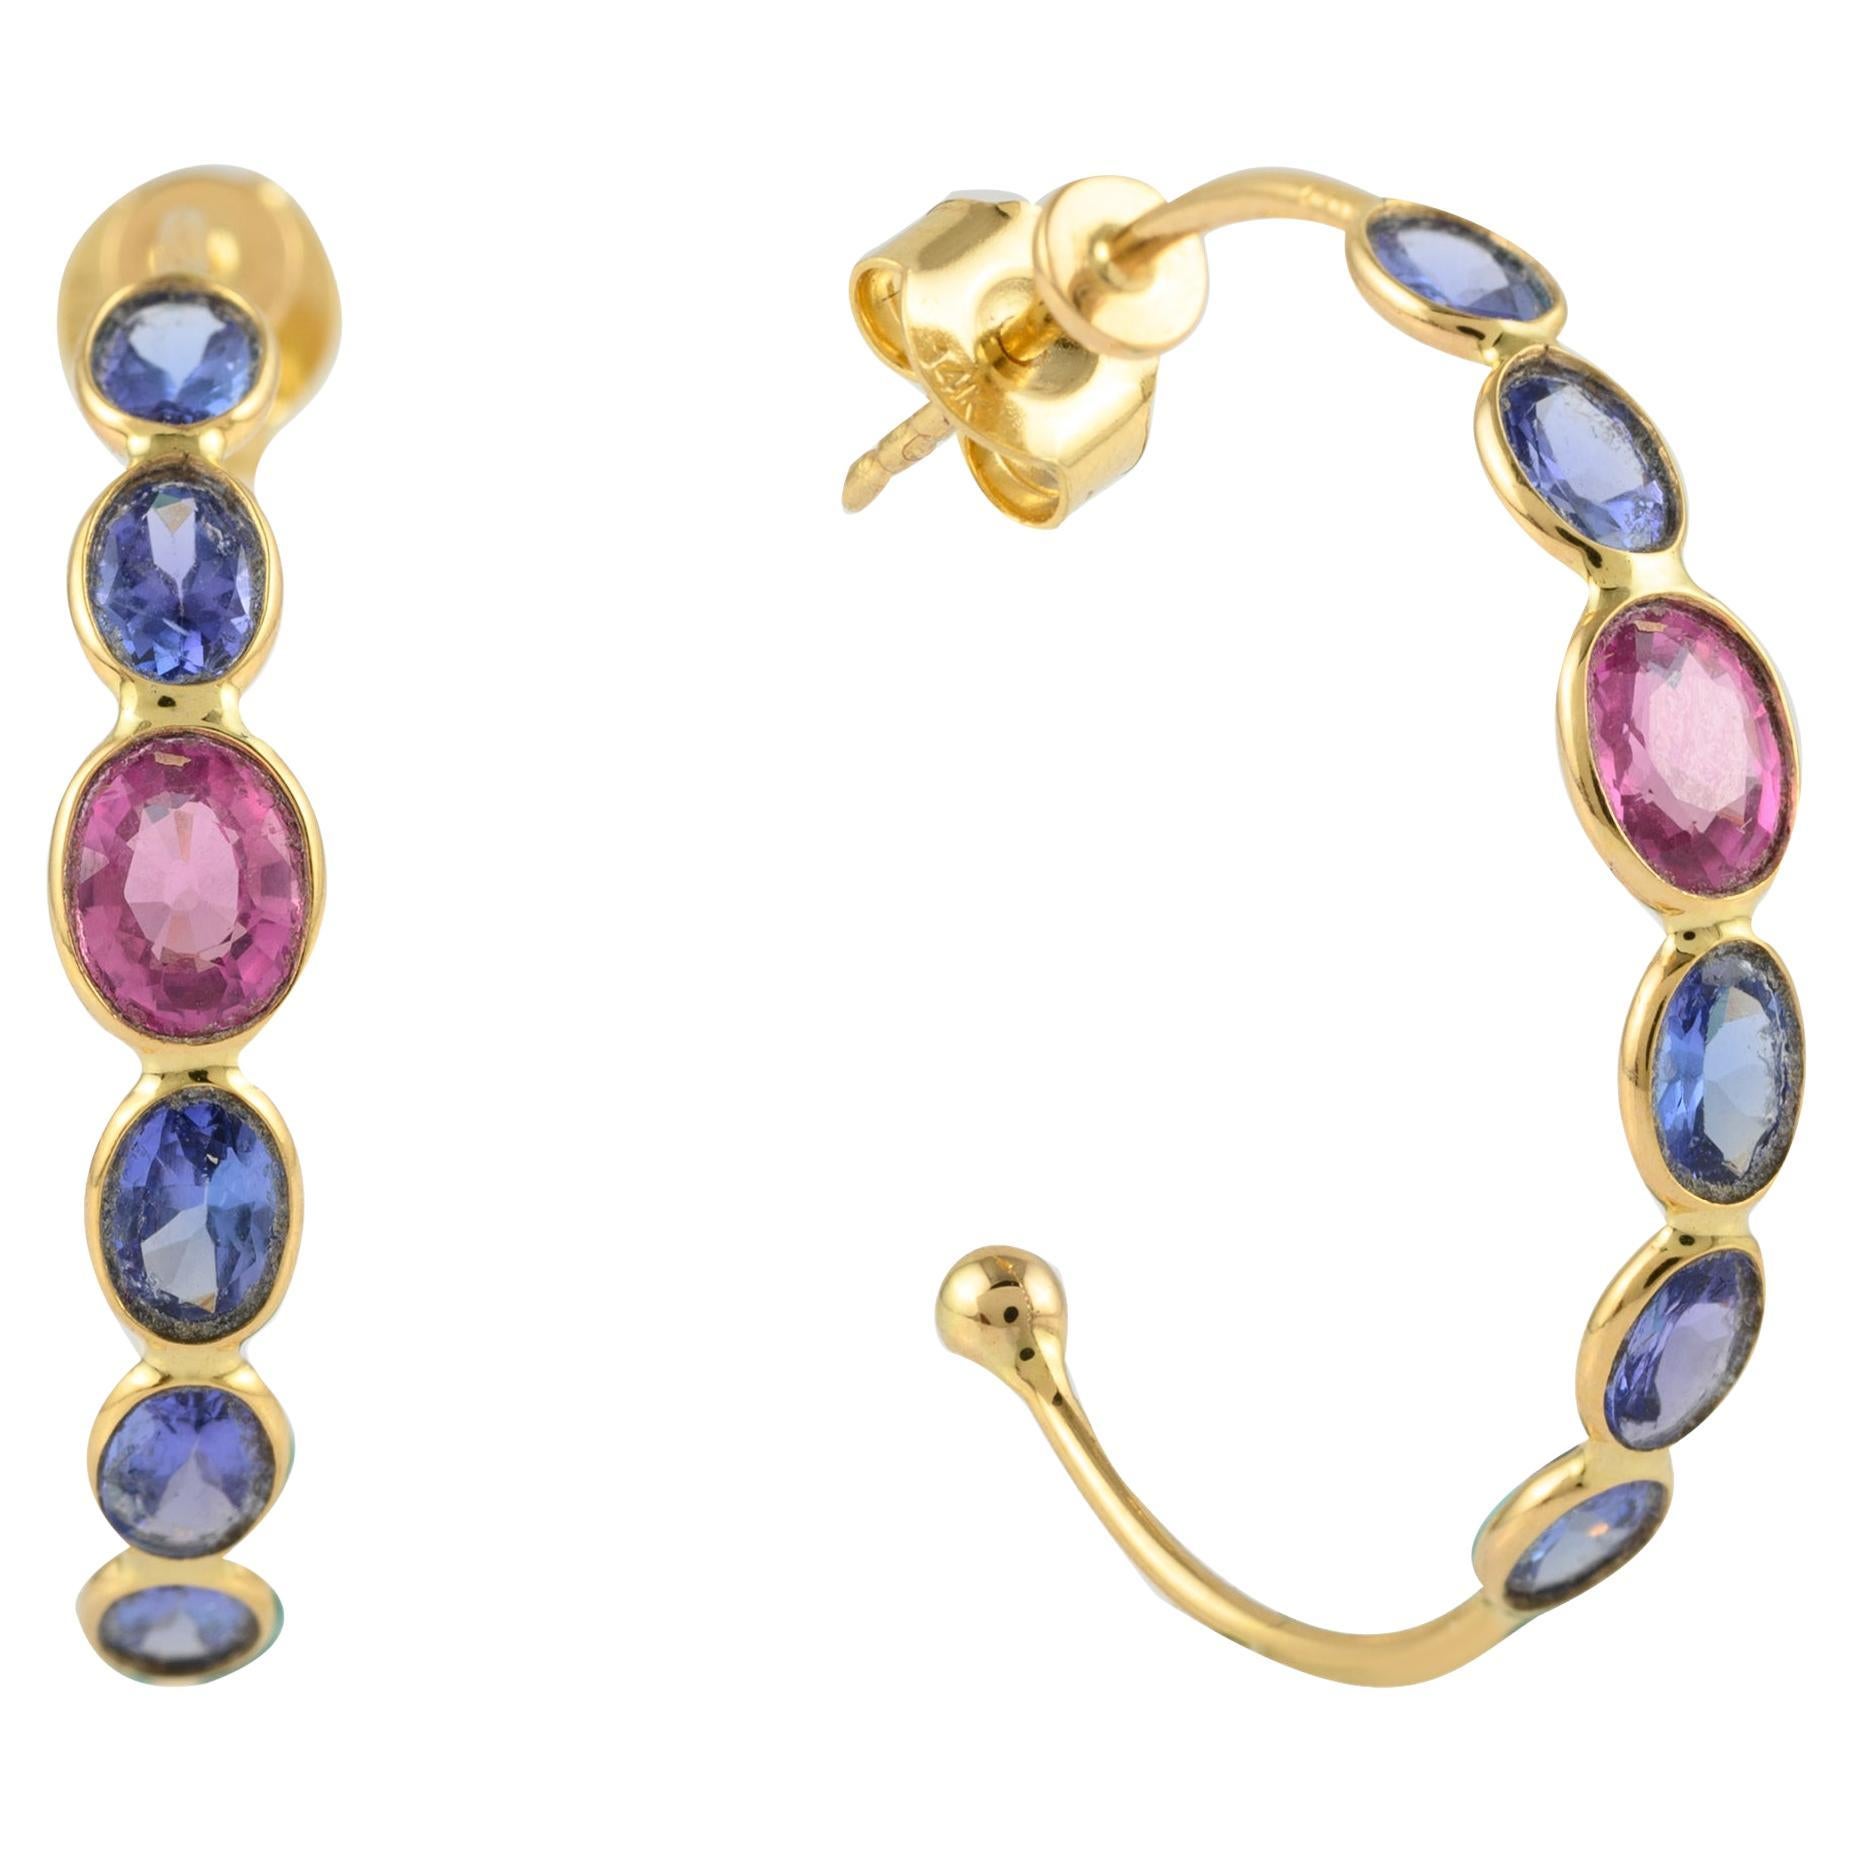 14k Solid Yellow Gold Mounted Multi Sapphire Hoop Earrings Gift for Her